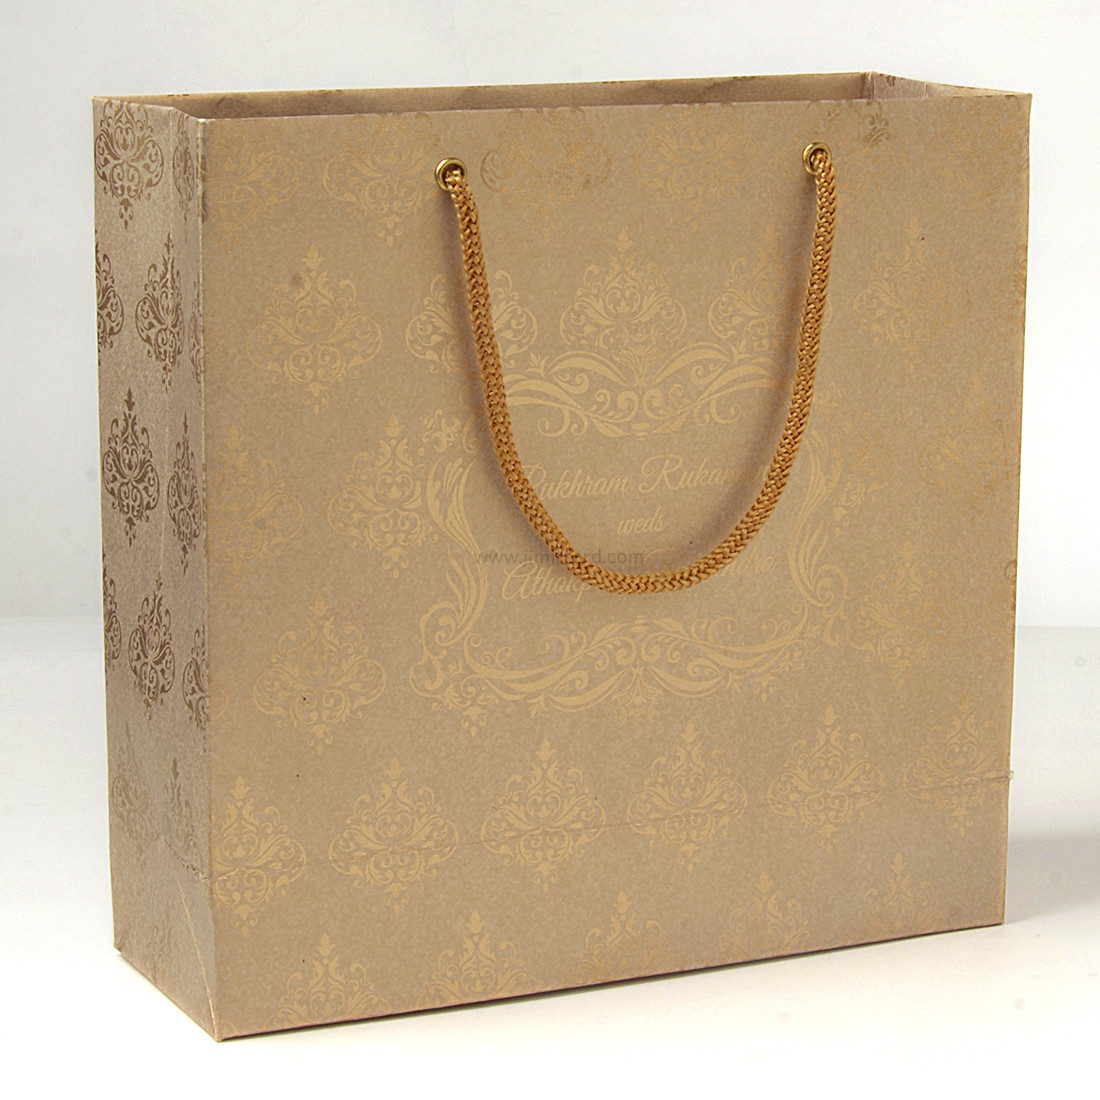 Gift Paper Bag in Dull Gold Color